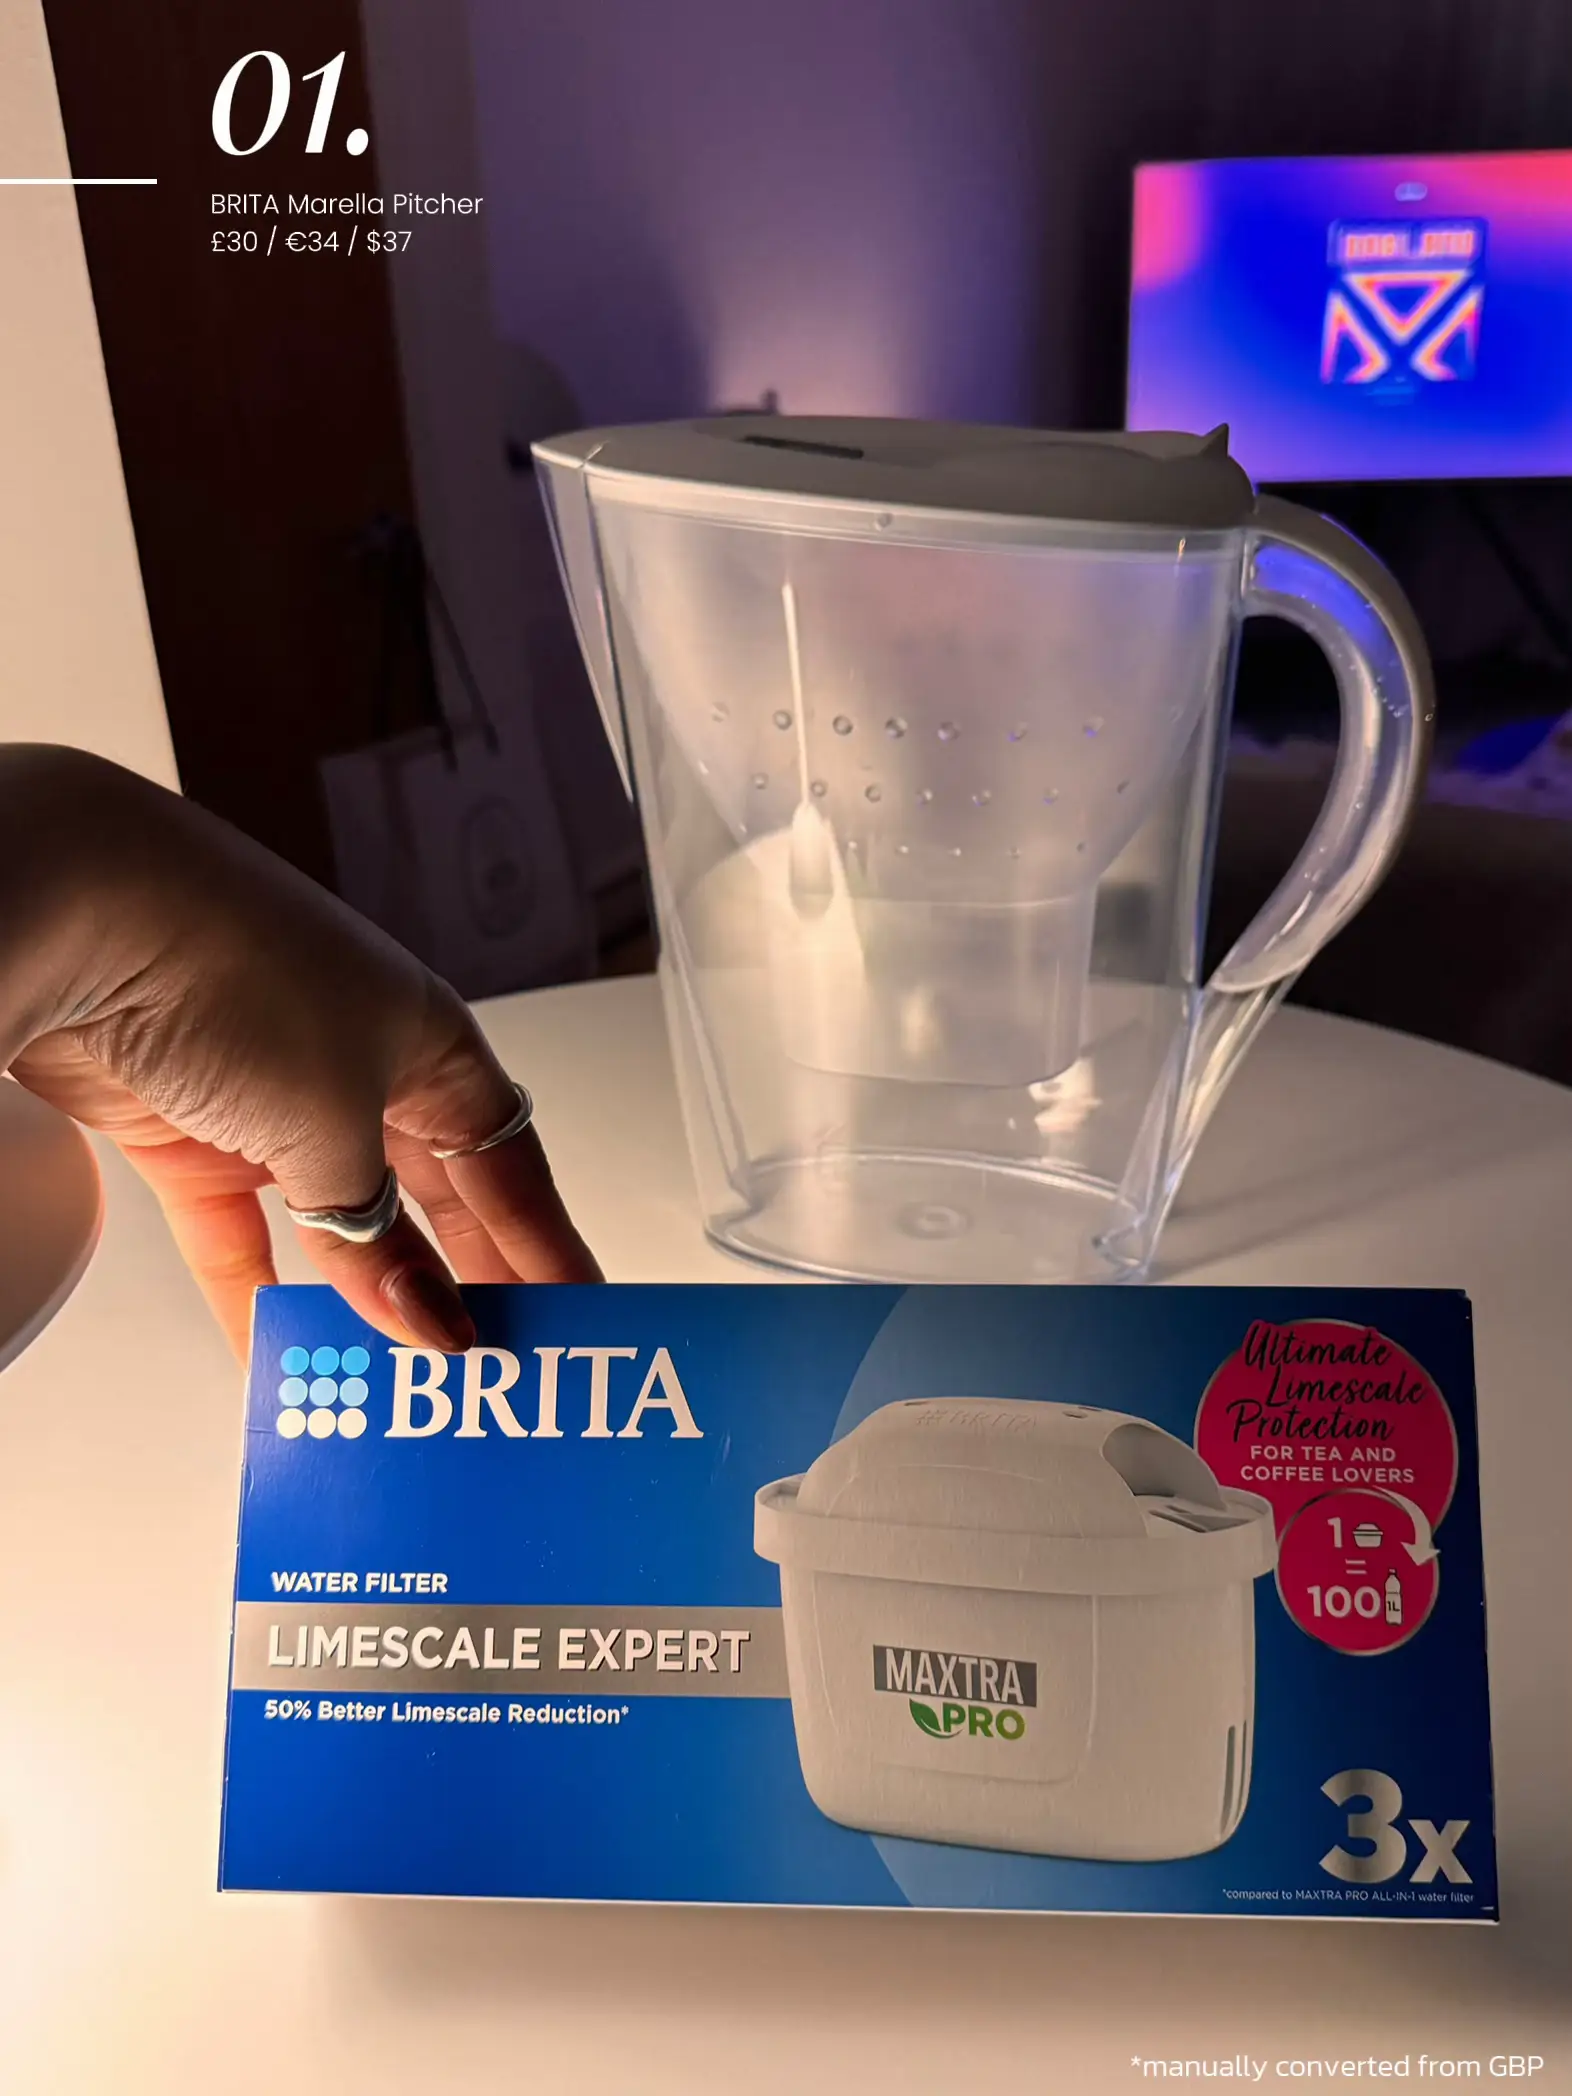 Pack of 3 BRITA MAXTRA Pro Limescale Expert Water Filters - White